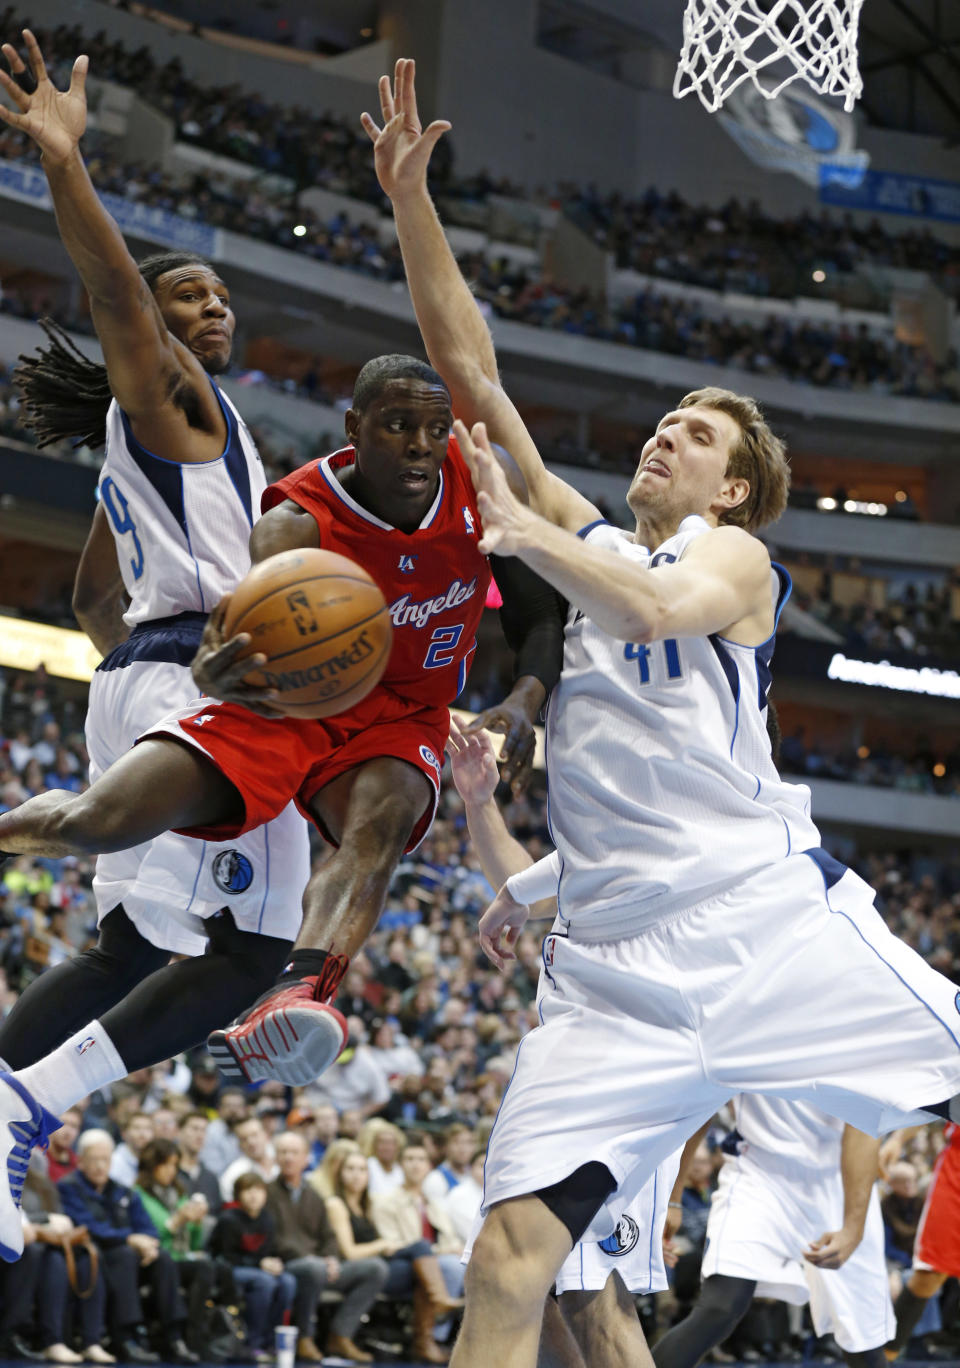 Dallas Mavericks forwards Jae Crowder (9) and Dirk Nowitzki (41) defend as Los Angeles Clippers guard Darren Collison passes under the basket during the first half of an NBA basketball game Friday, Jan. 3, 2014, in Dallas. (AP Photo/Sharon Ellman)